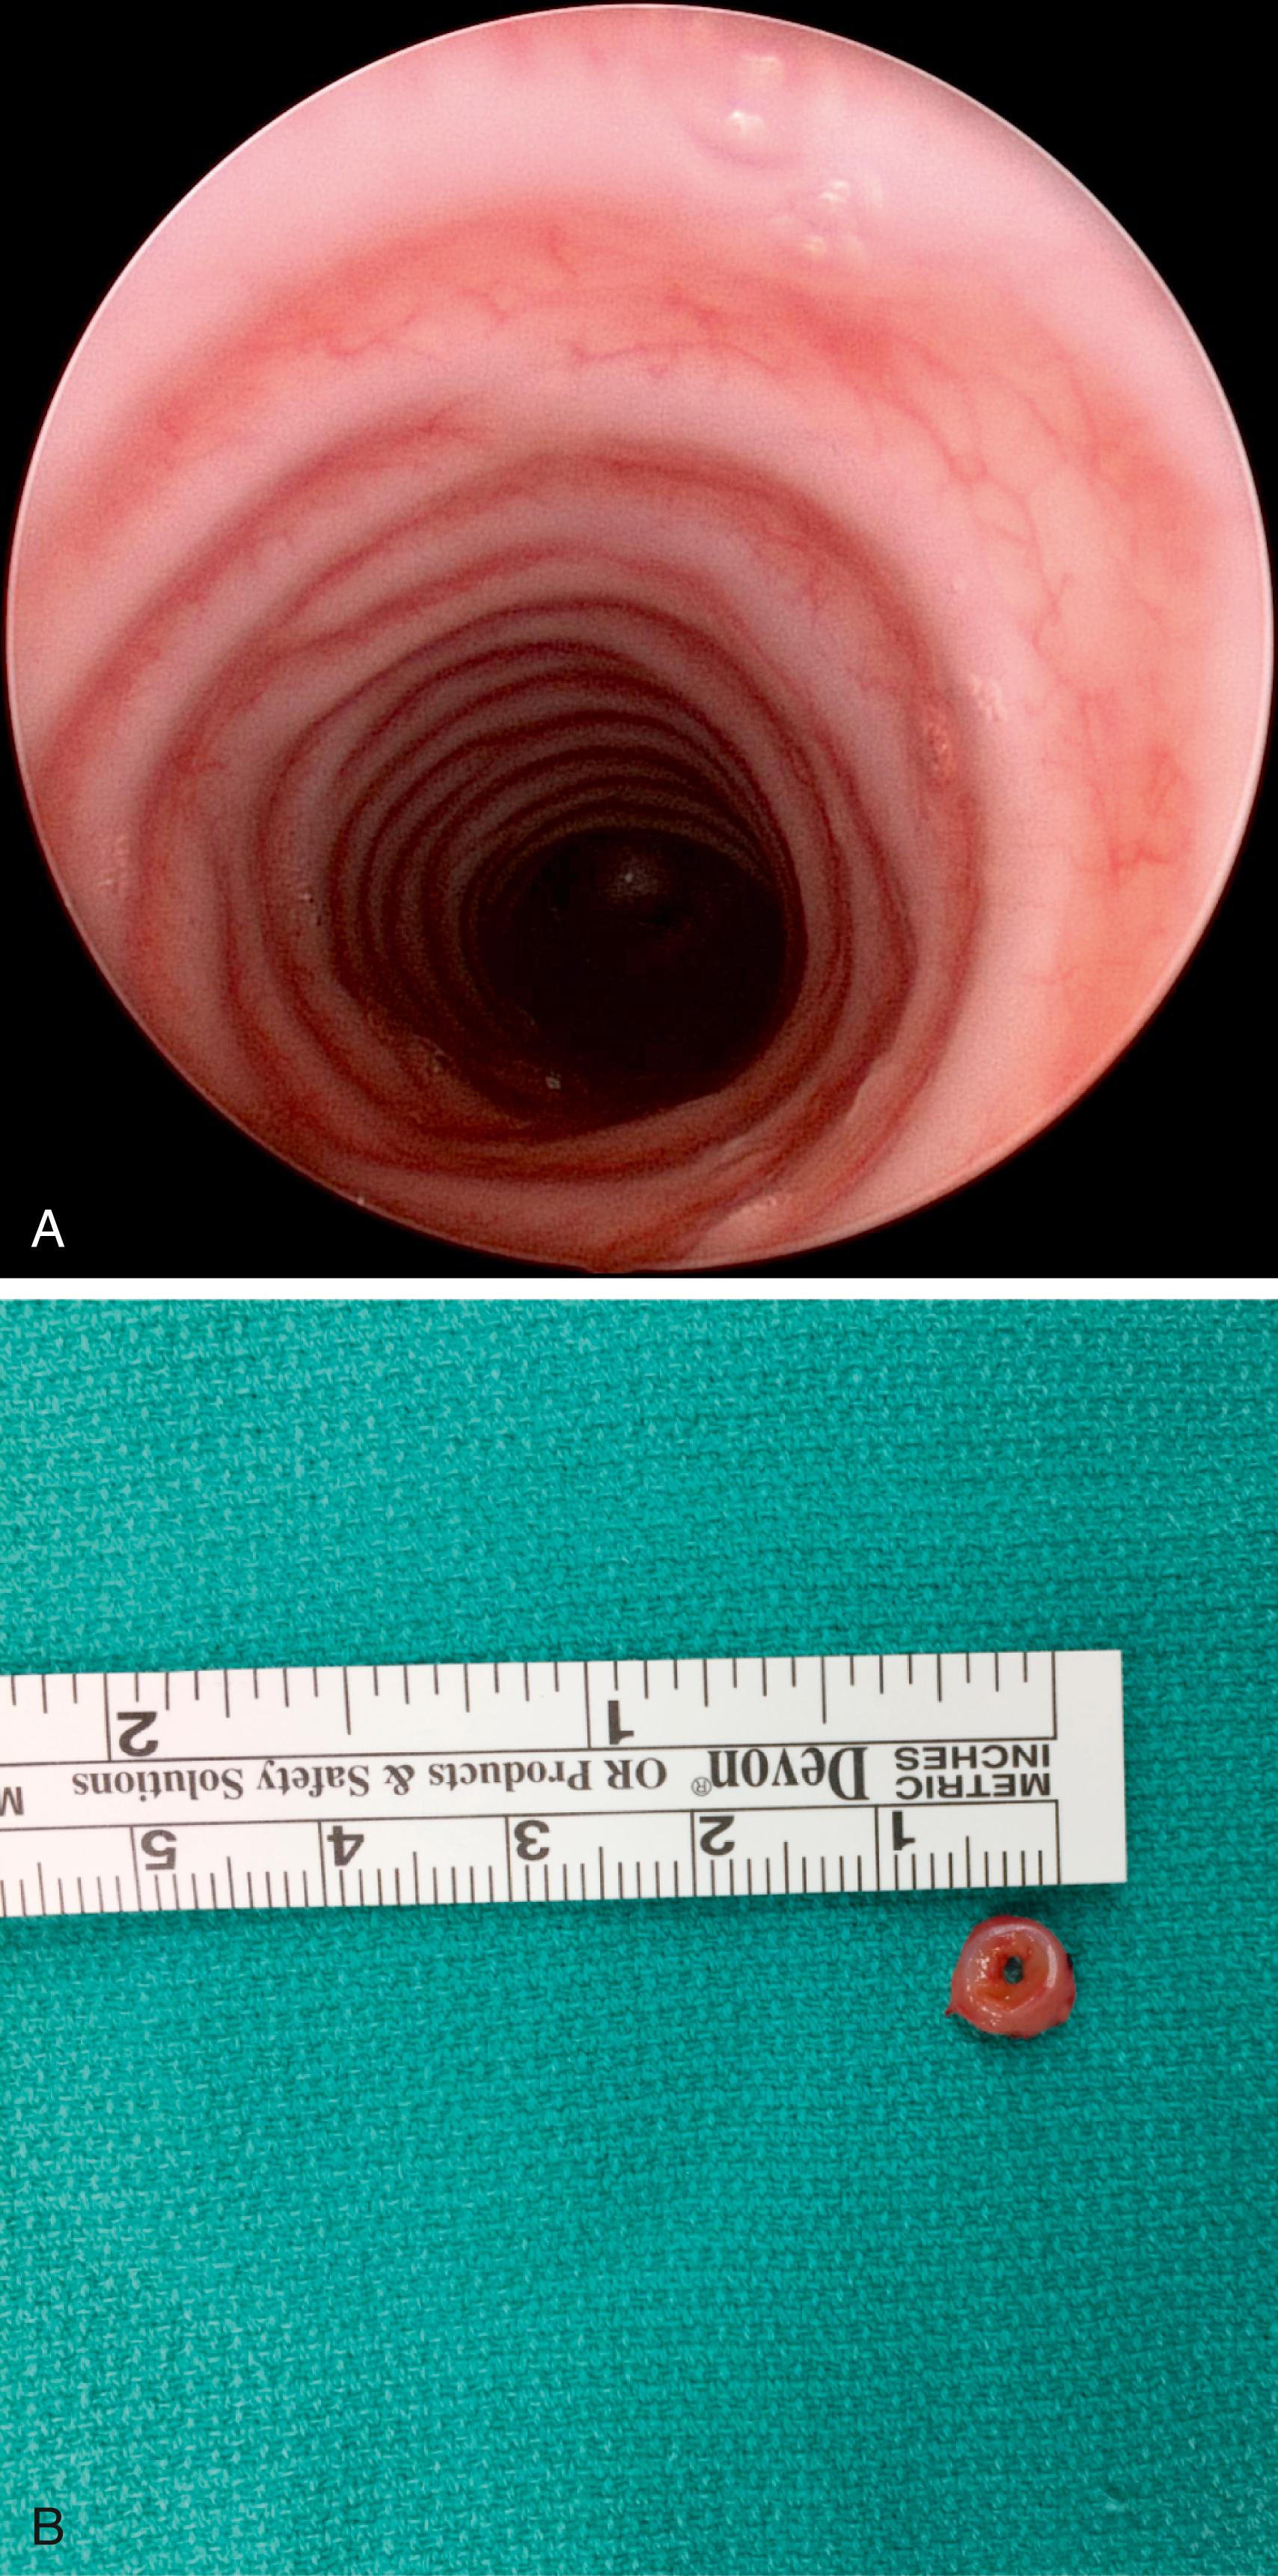 Fig. 30.1, (A) Long-segment tracheal stenosis (complete rings), endoscopic view. (B) Tracheal stenosis (complete ring), gross anatomic view of a resected ring.